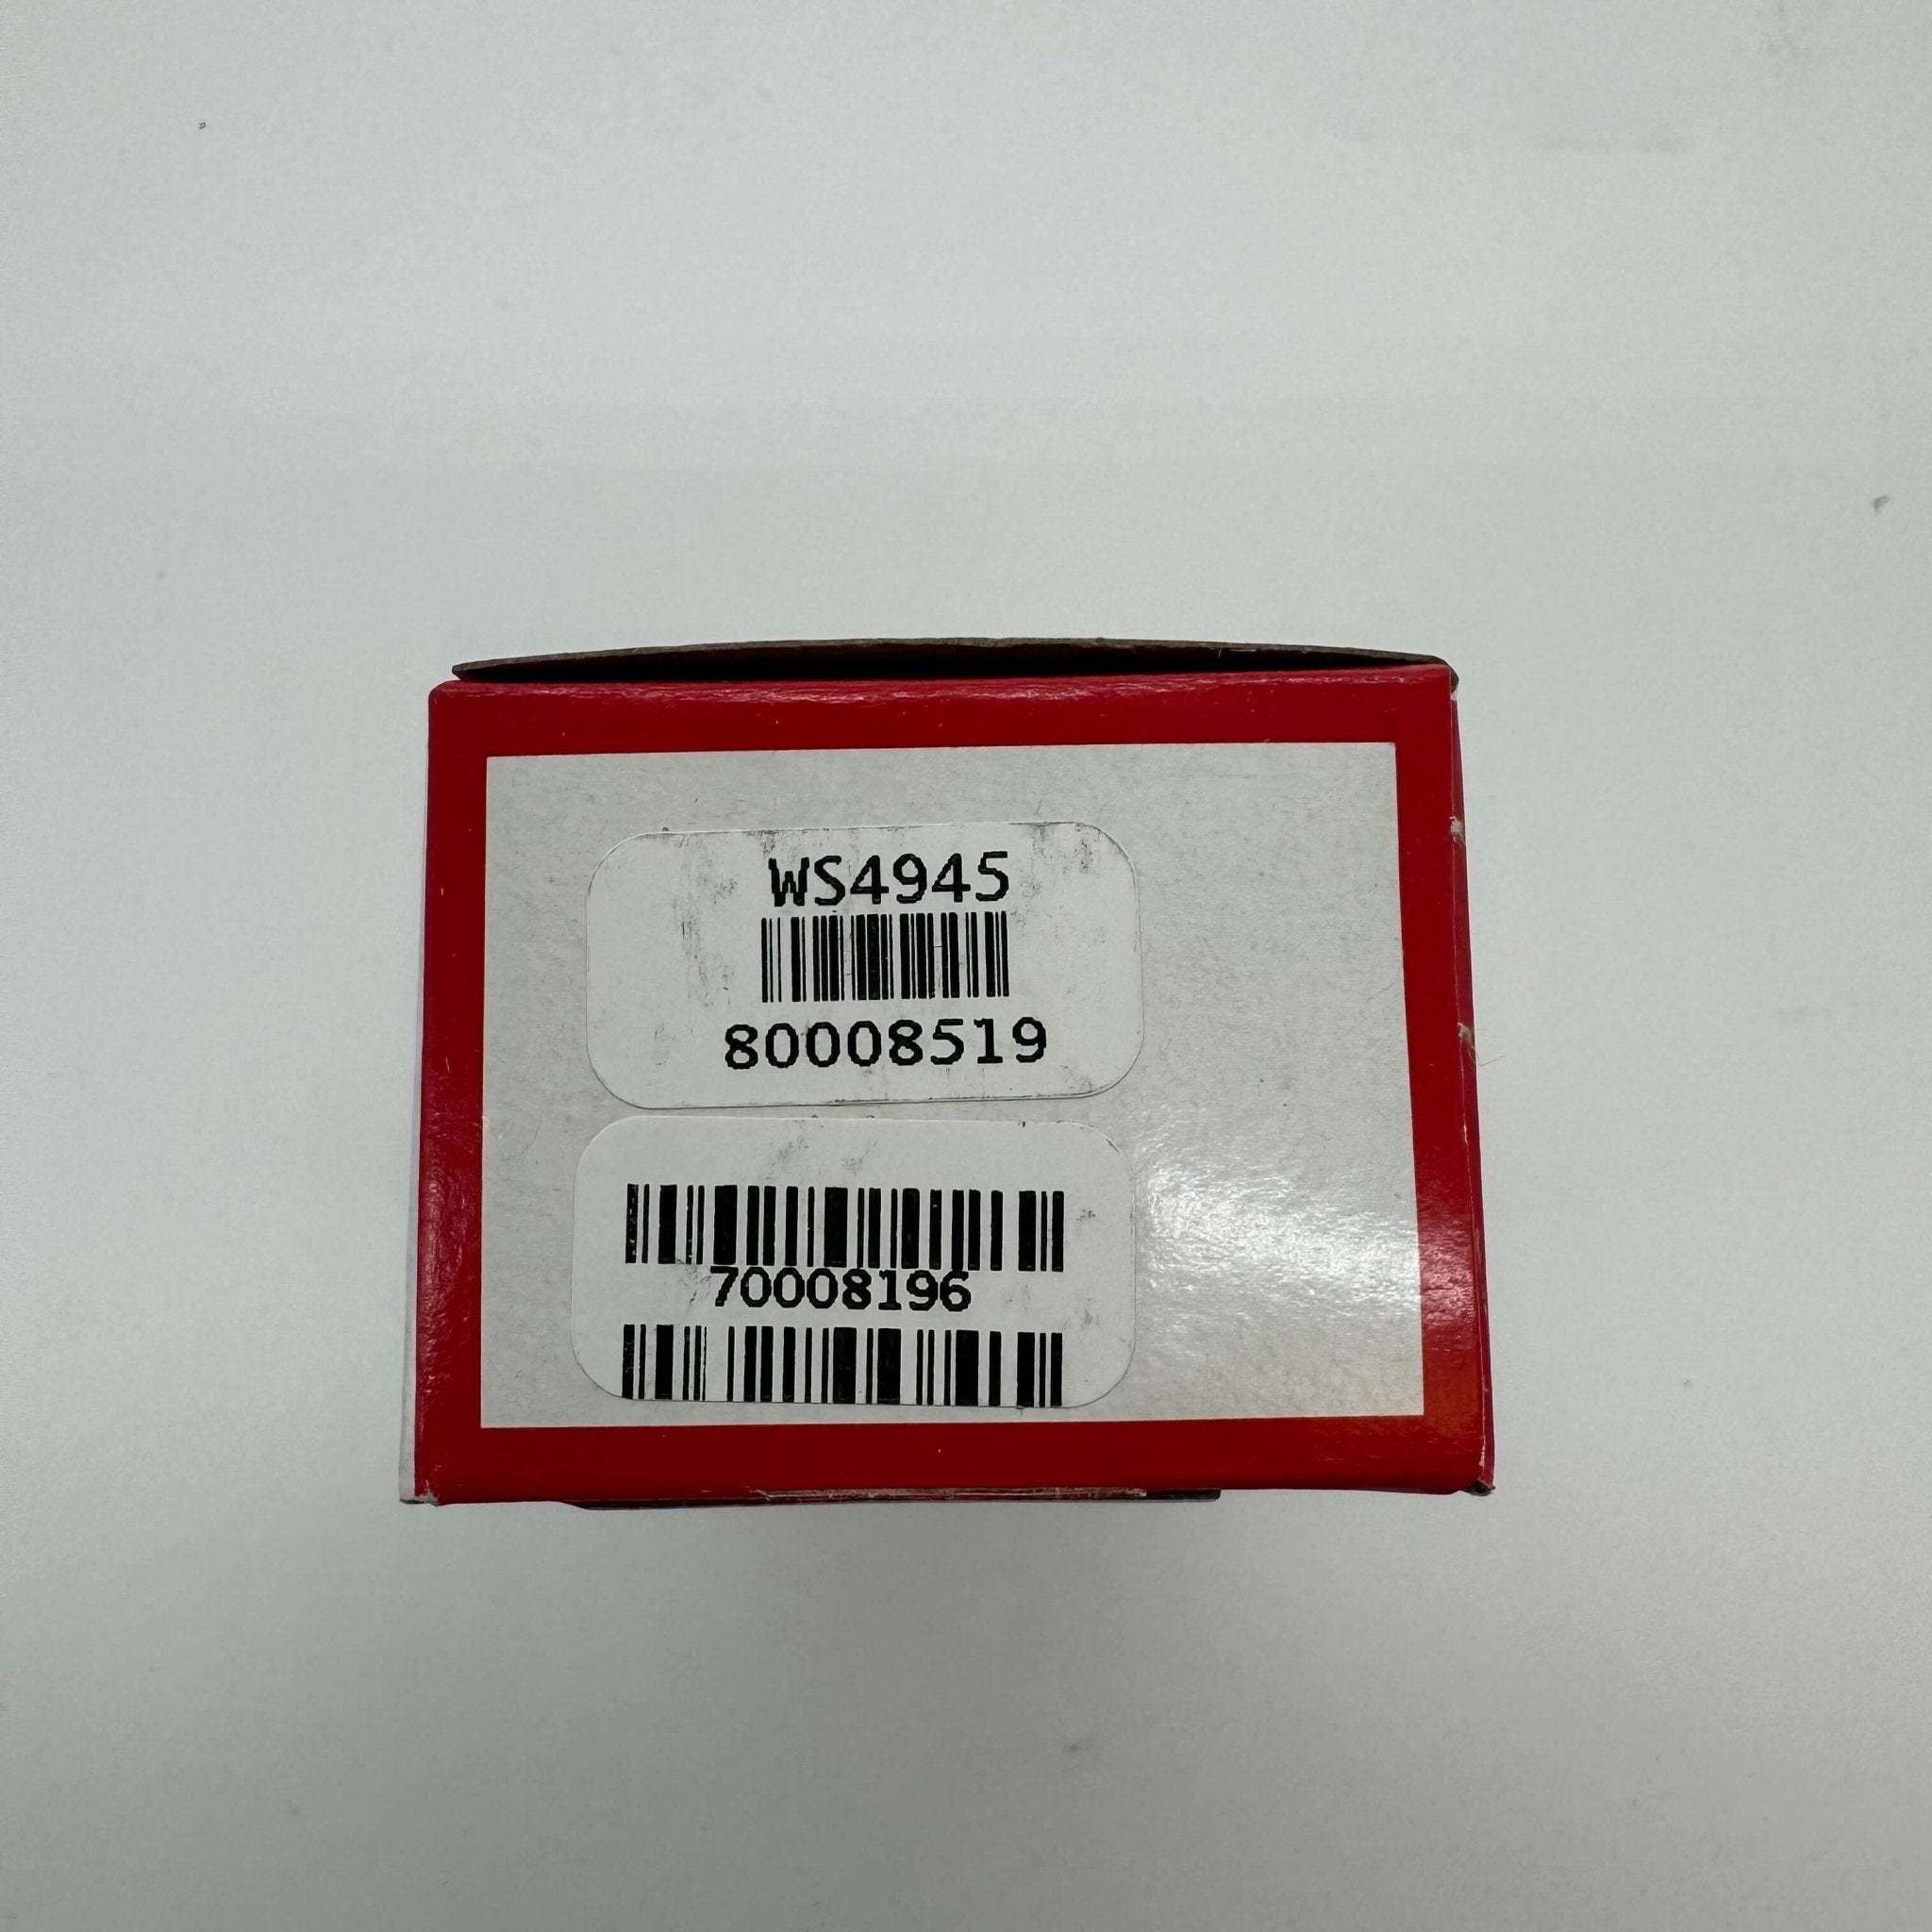 DSC WS4945 (Discontinued, Last Units in Stock) - The Fire Alarm Supplier